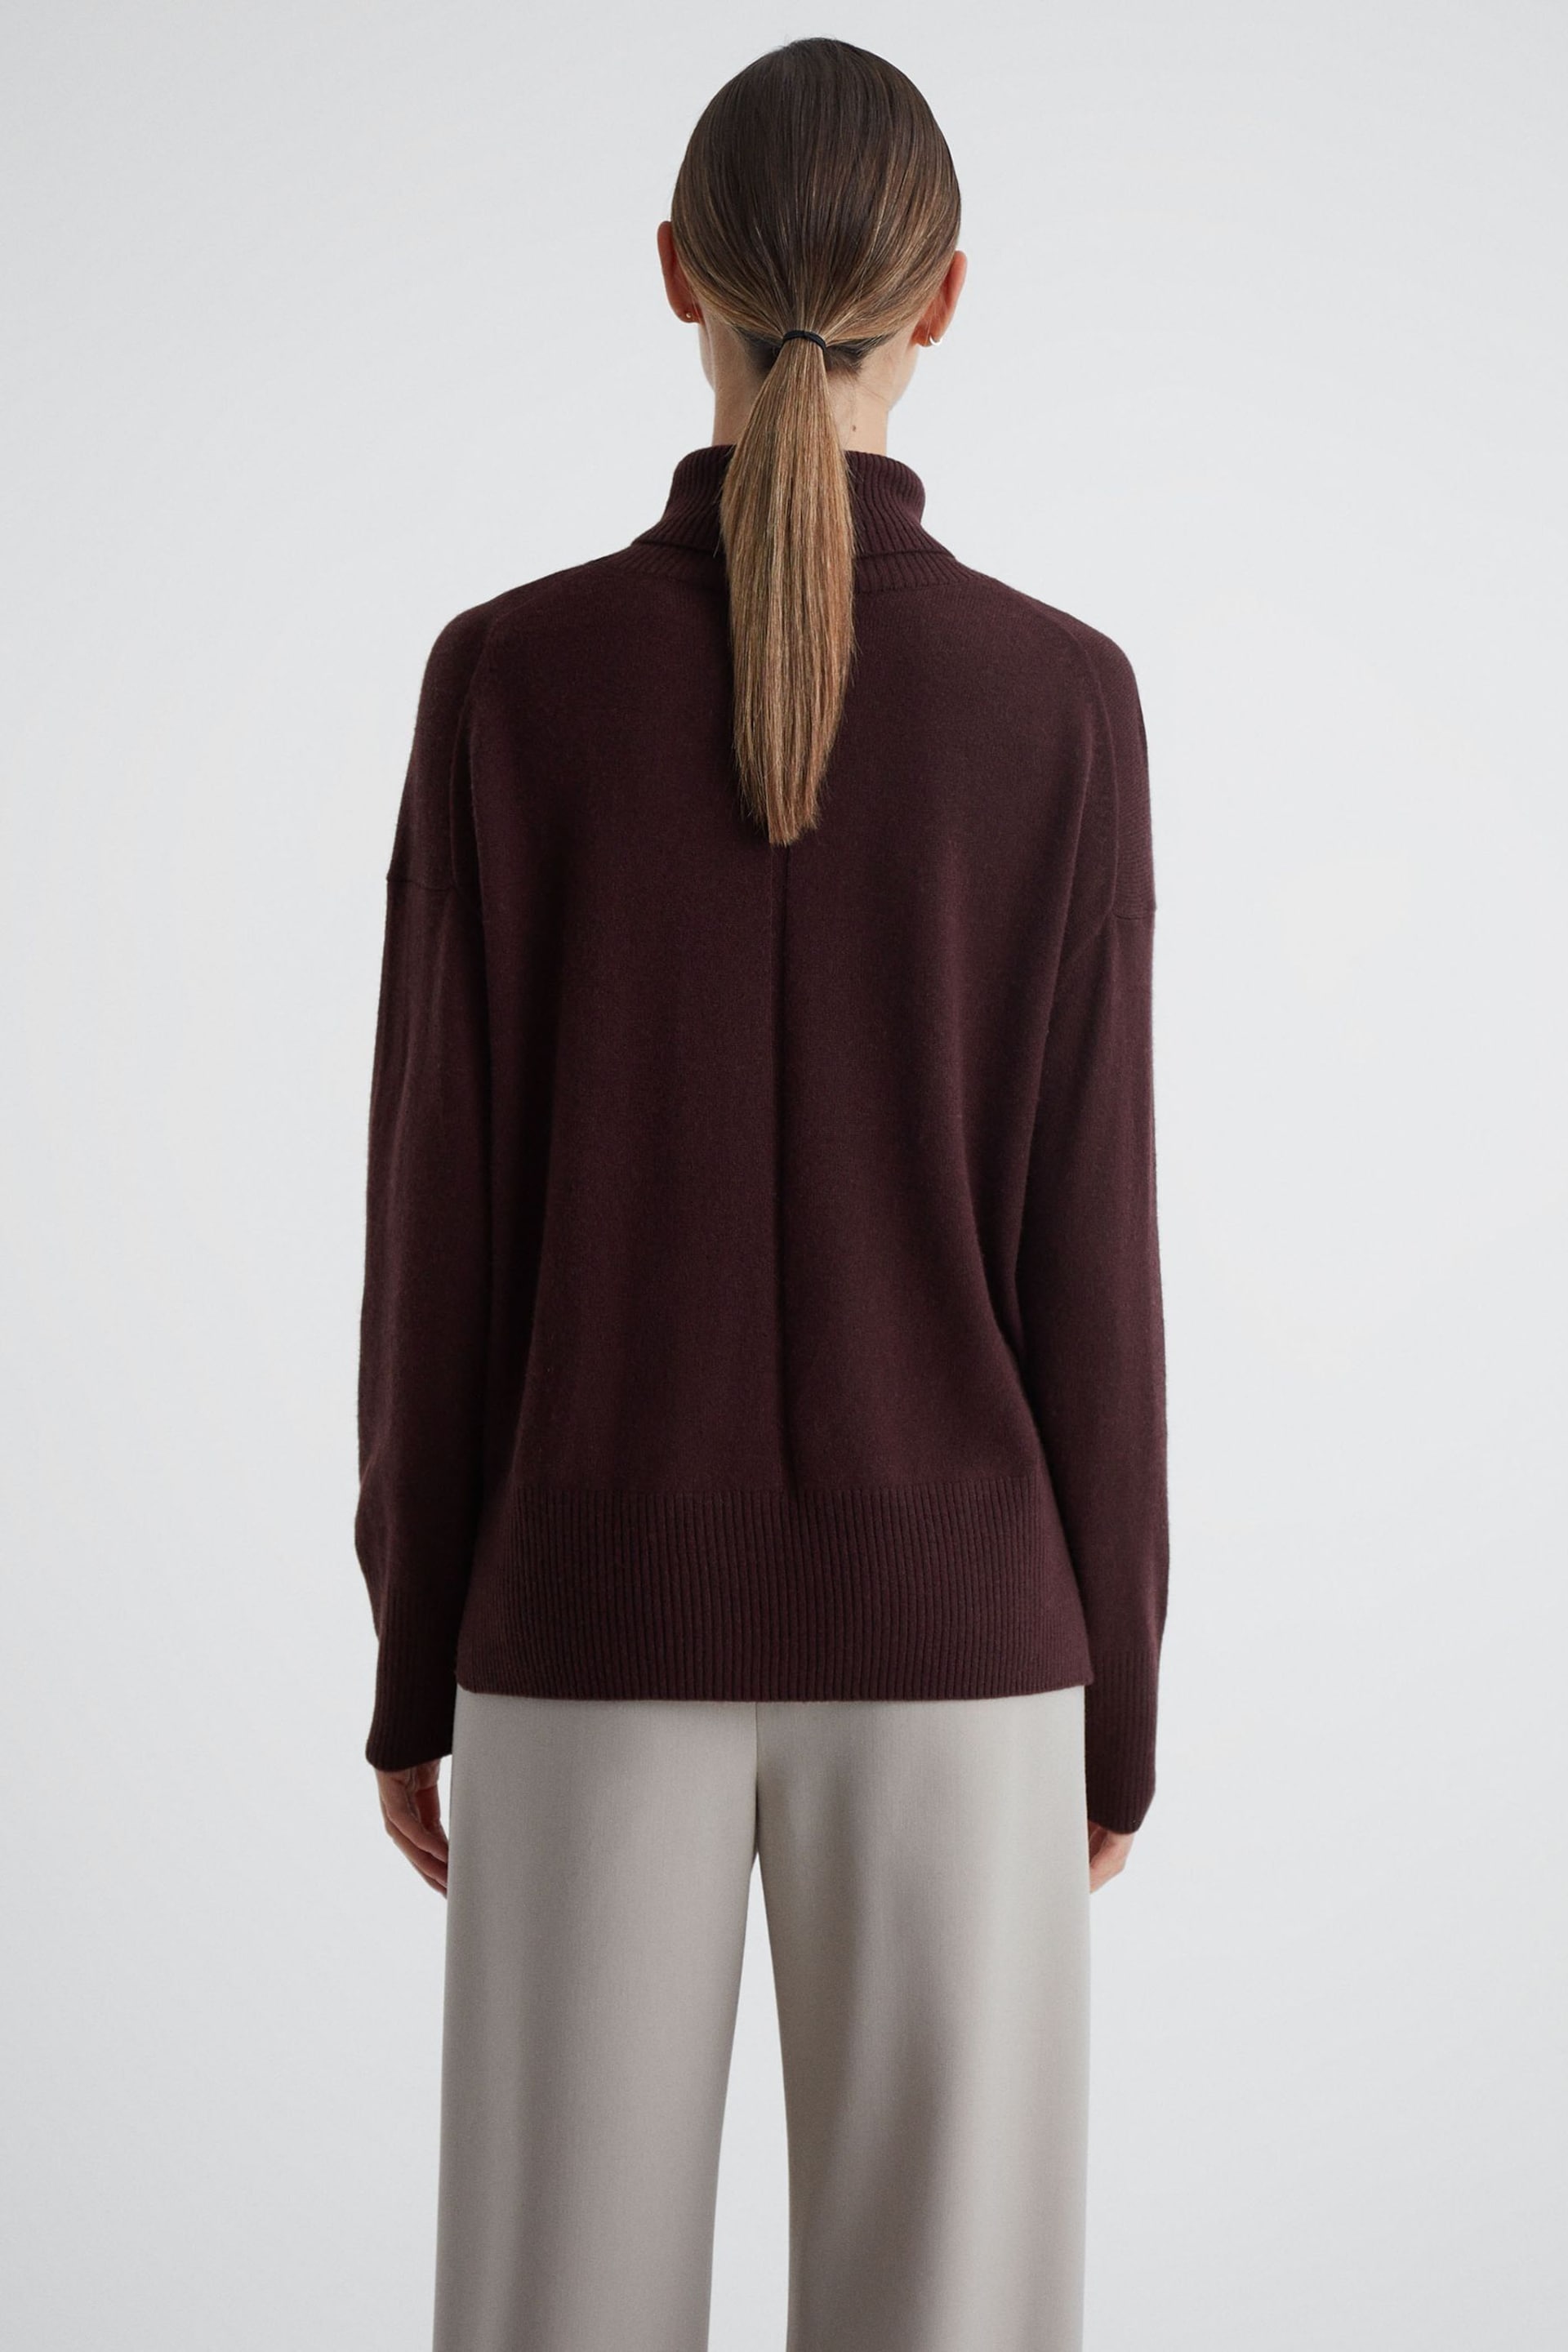 Reiss Berry Alexis Wool Blend Roll Neck Jumper - Image 5 of 5